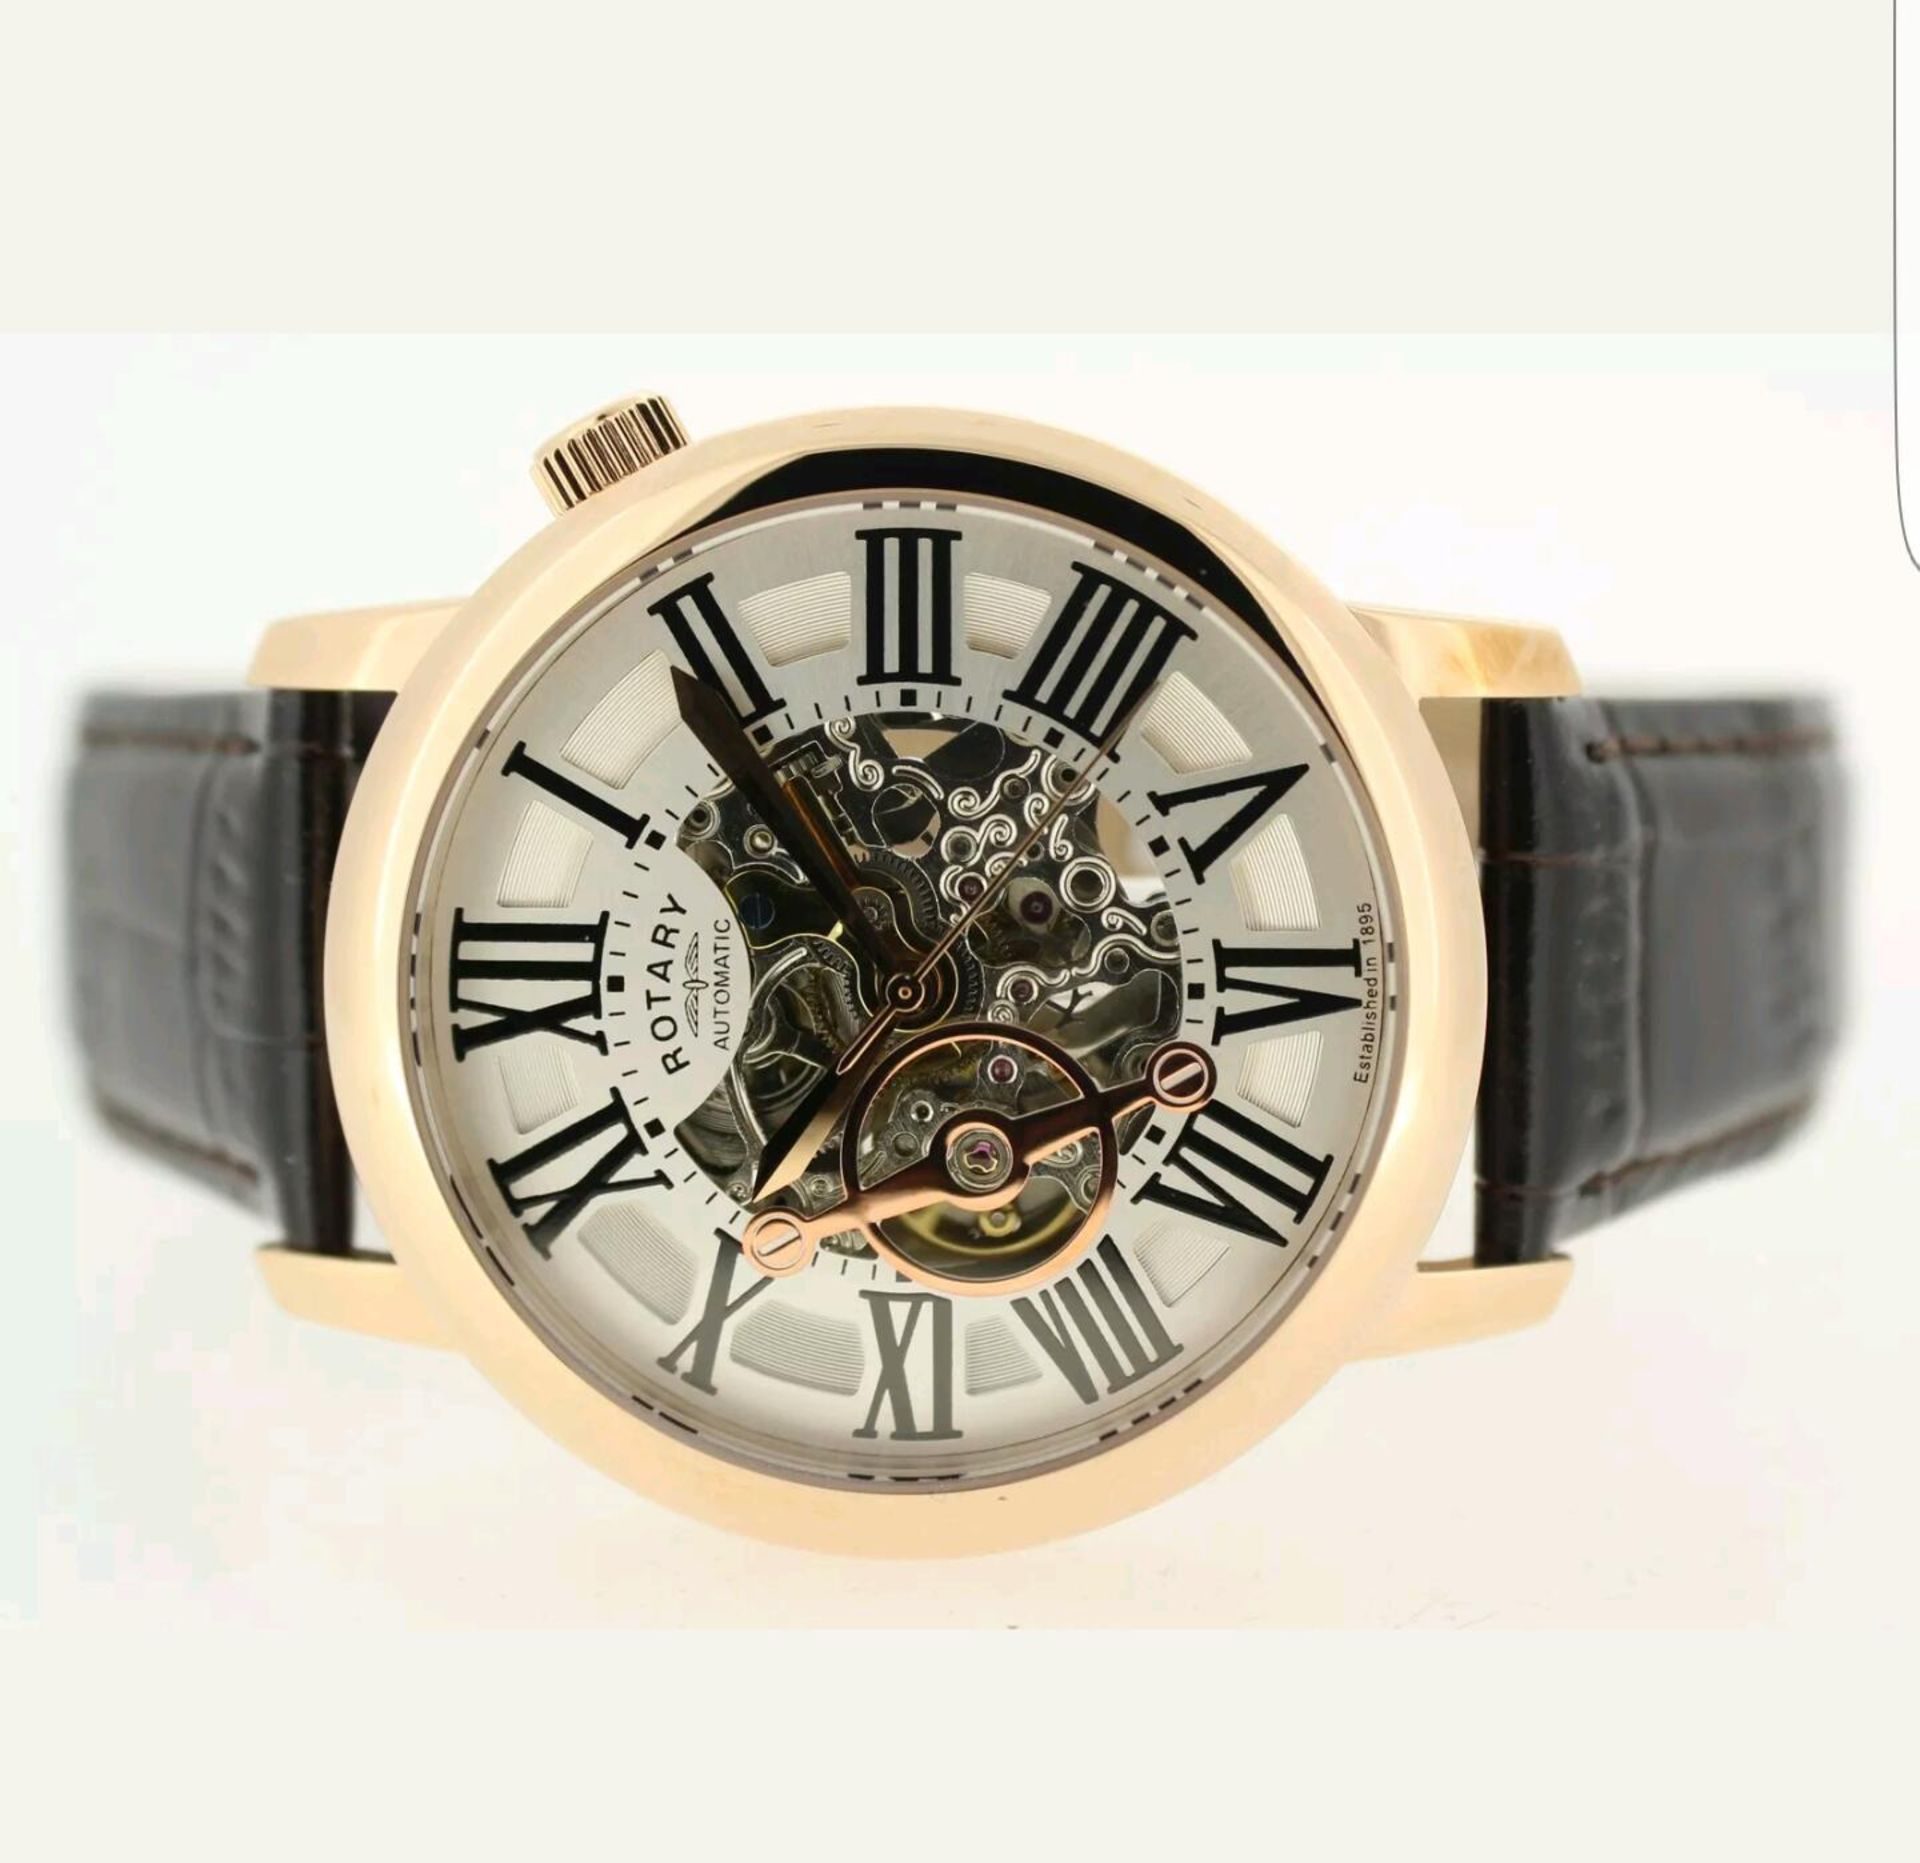 BRAND NEW ROTARY GLE000017/21 MENS AUTOMATIC ROSE GOLD SKELETON WATCH, COMPLETE WITH ORIGINAL BOX - Image 2 of 2